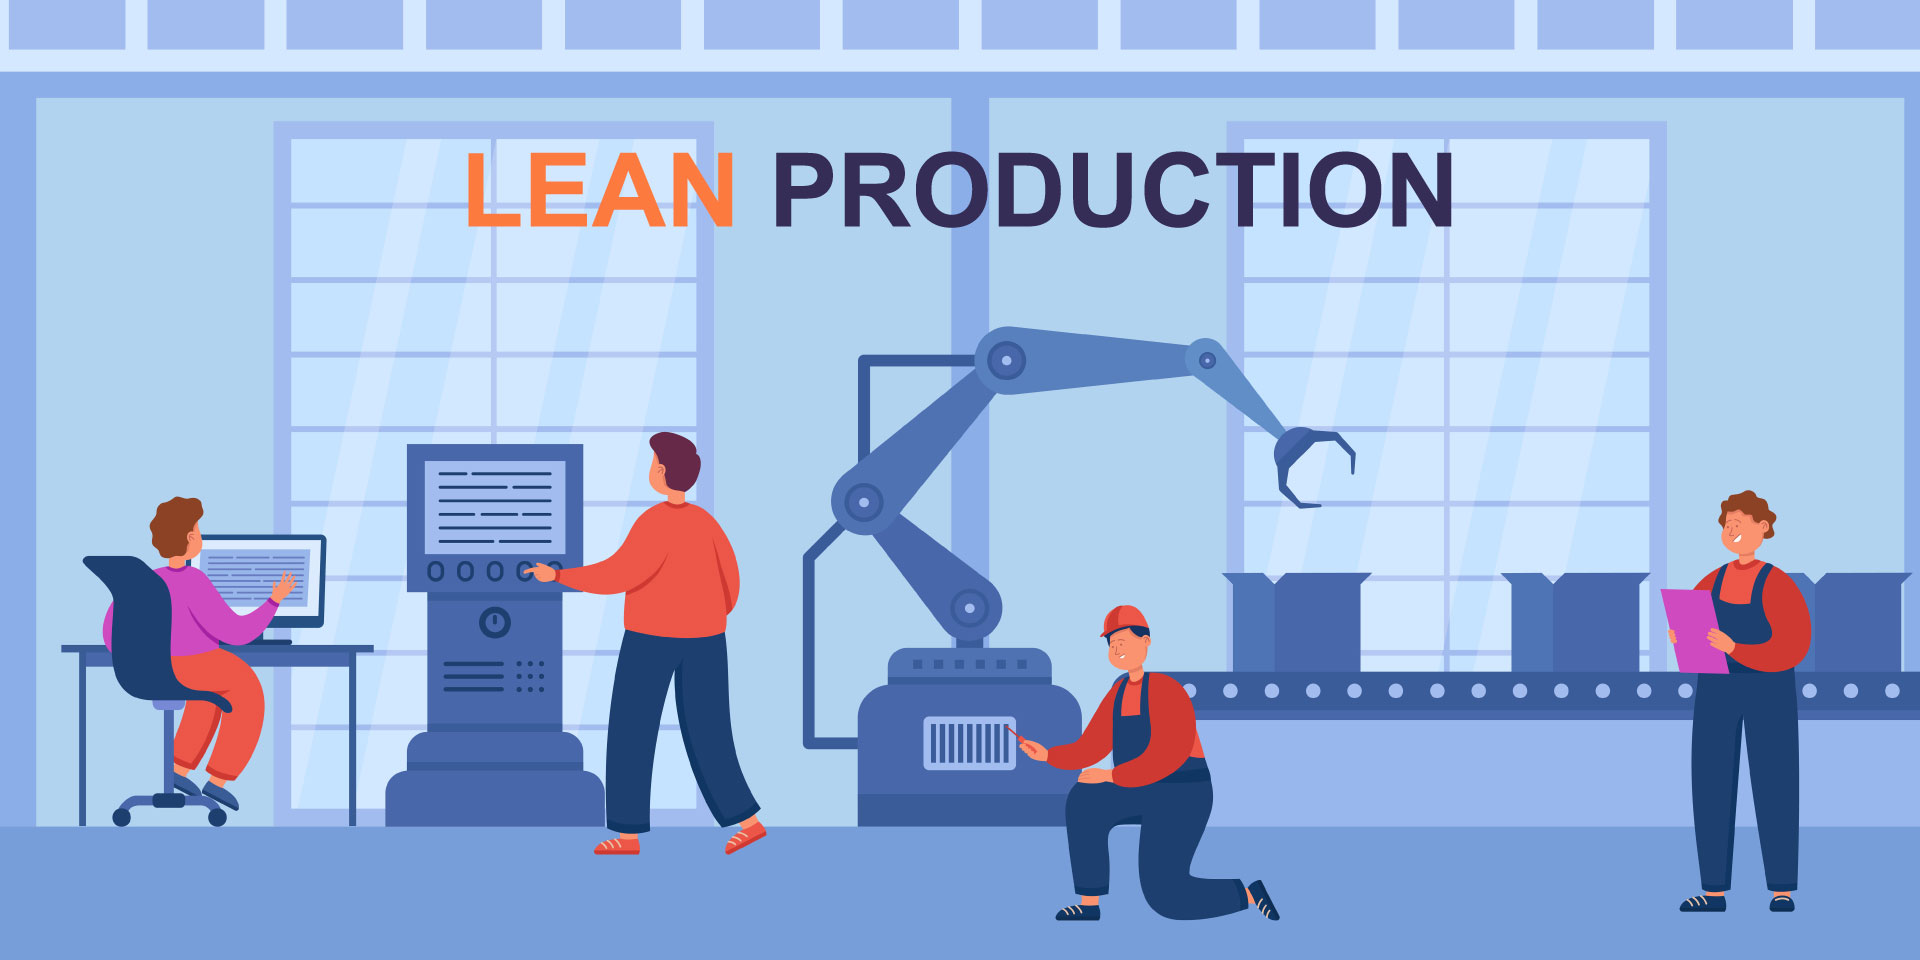 Lean production o manufacturing